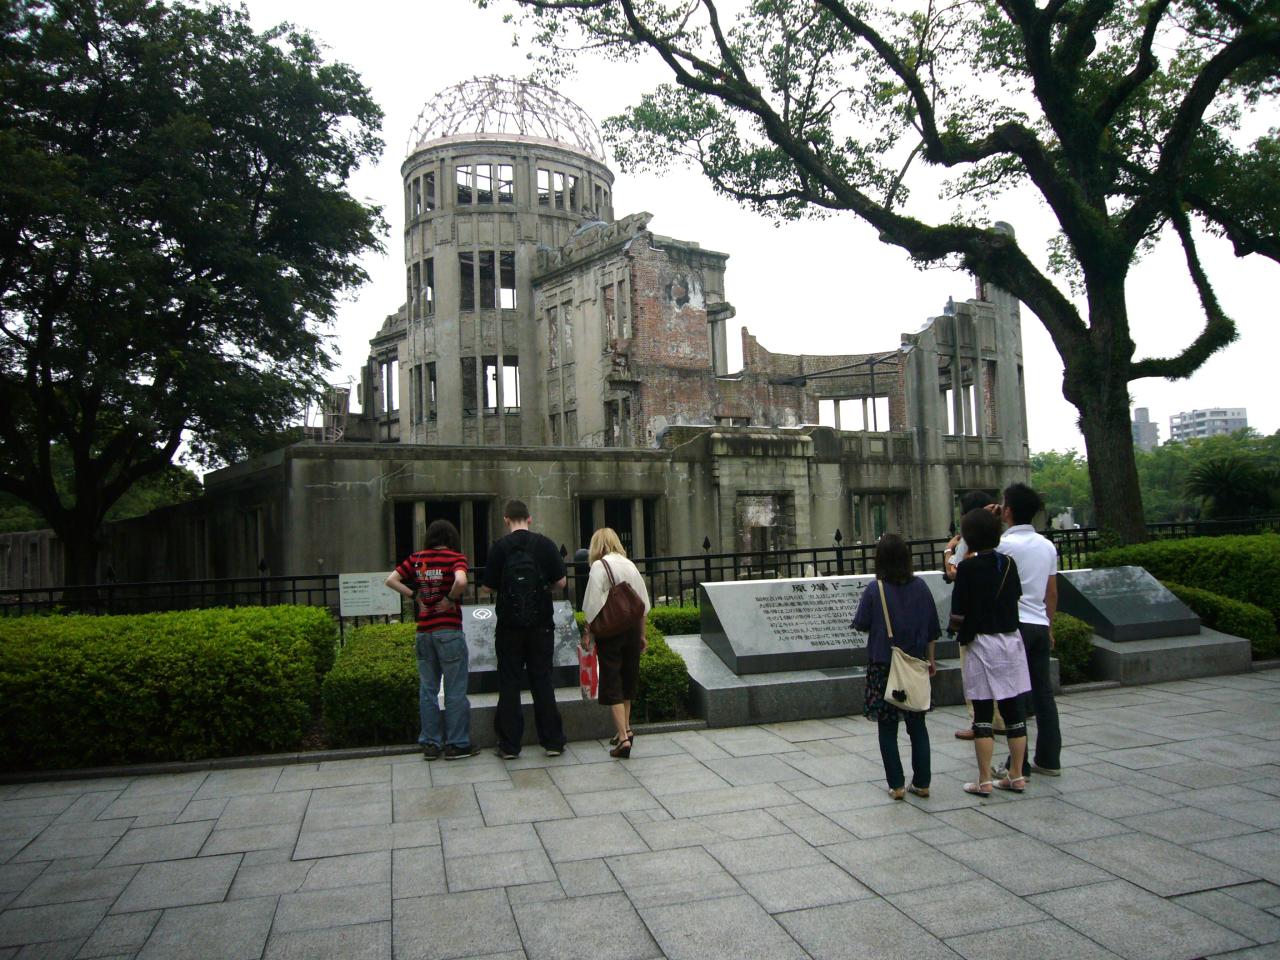 JPEG image - Hiroshima peace park: the only building left standing, now a monument, when the atomic bomb exploded almost directly overhead at a height og 600m. ...